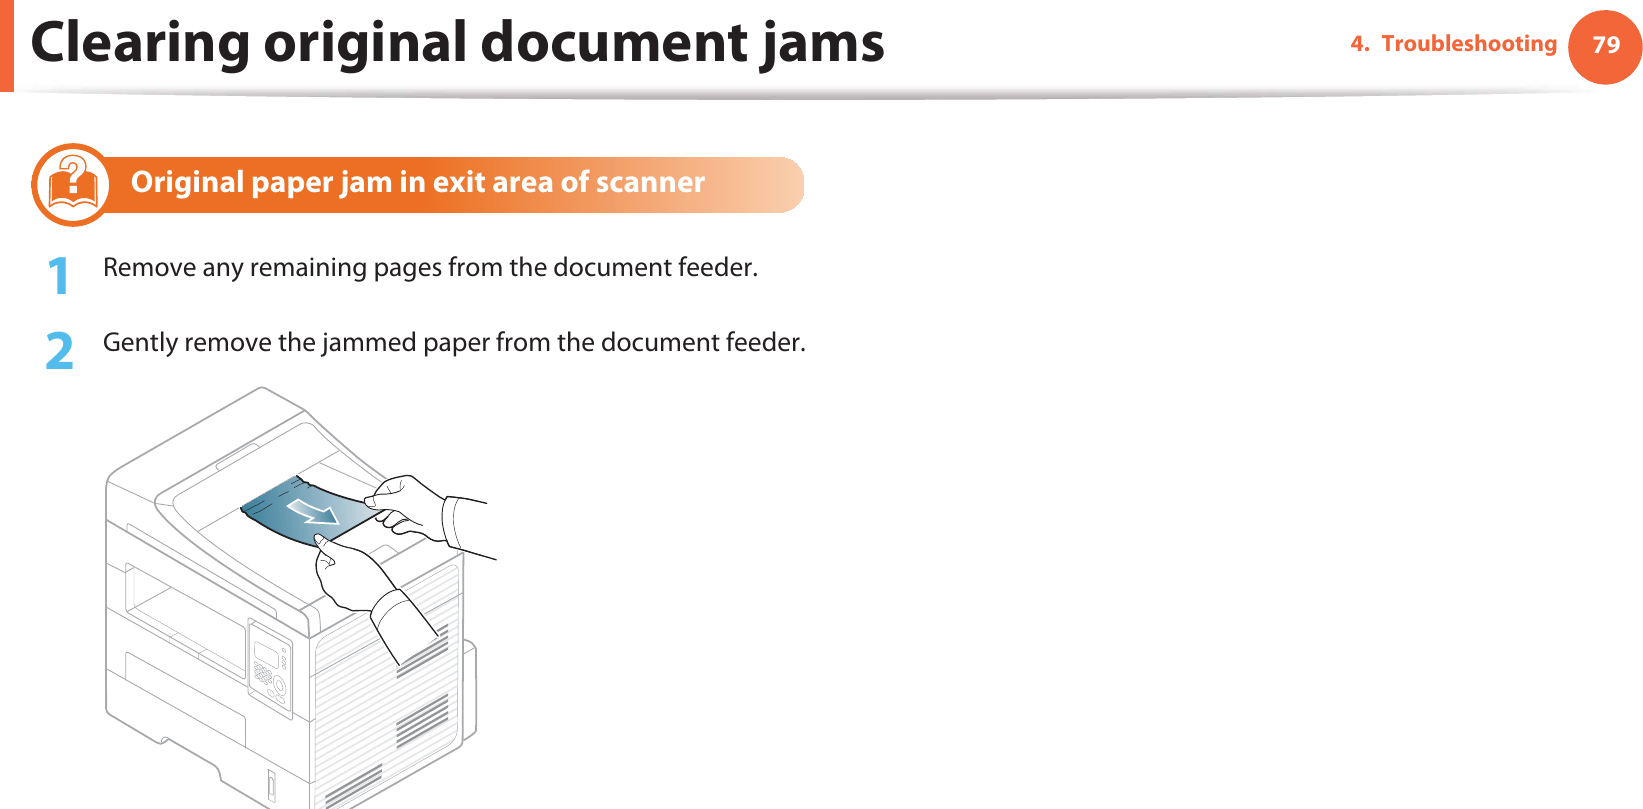 Clearing original document jams 794. Troubleshooting3 Original paper jam in exit area of scanner1Remove any remaining pages from the document feeder.2  Gently remove the jammed paper from the document feeder.